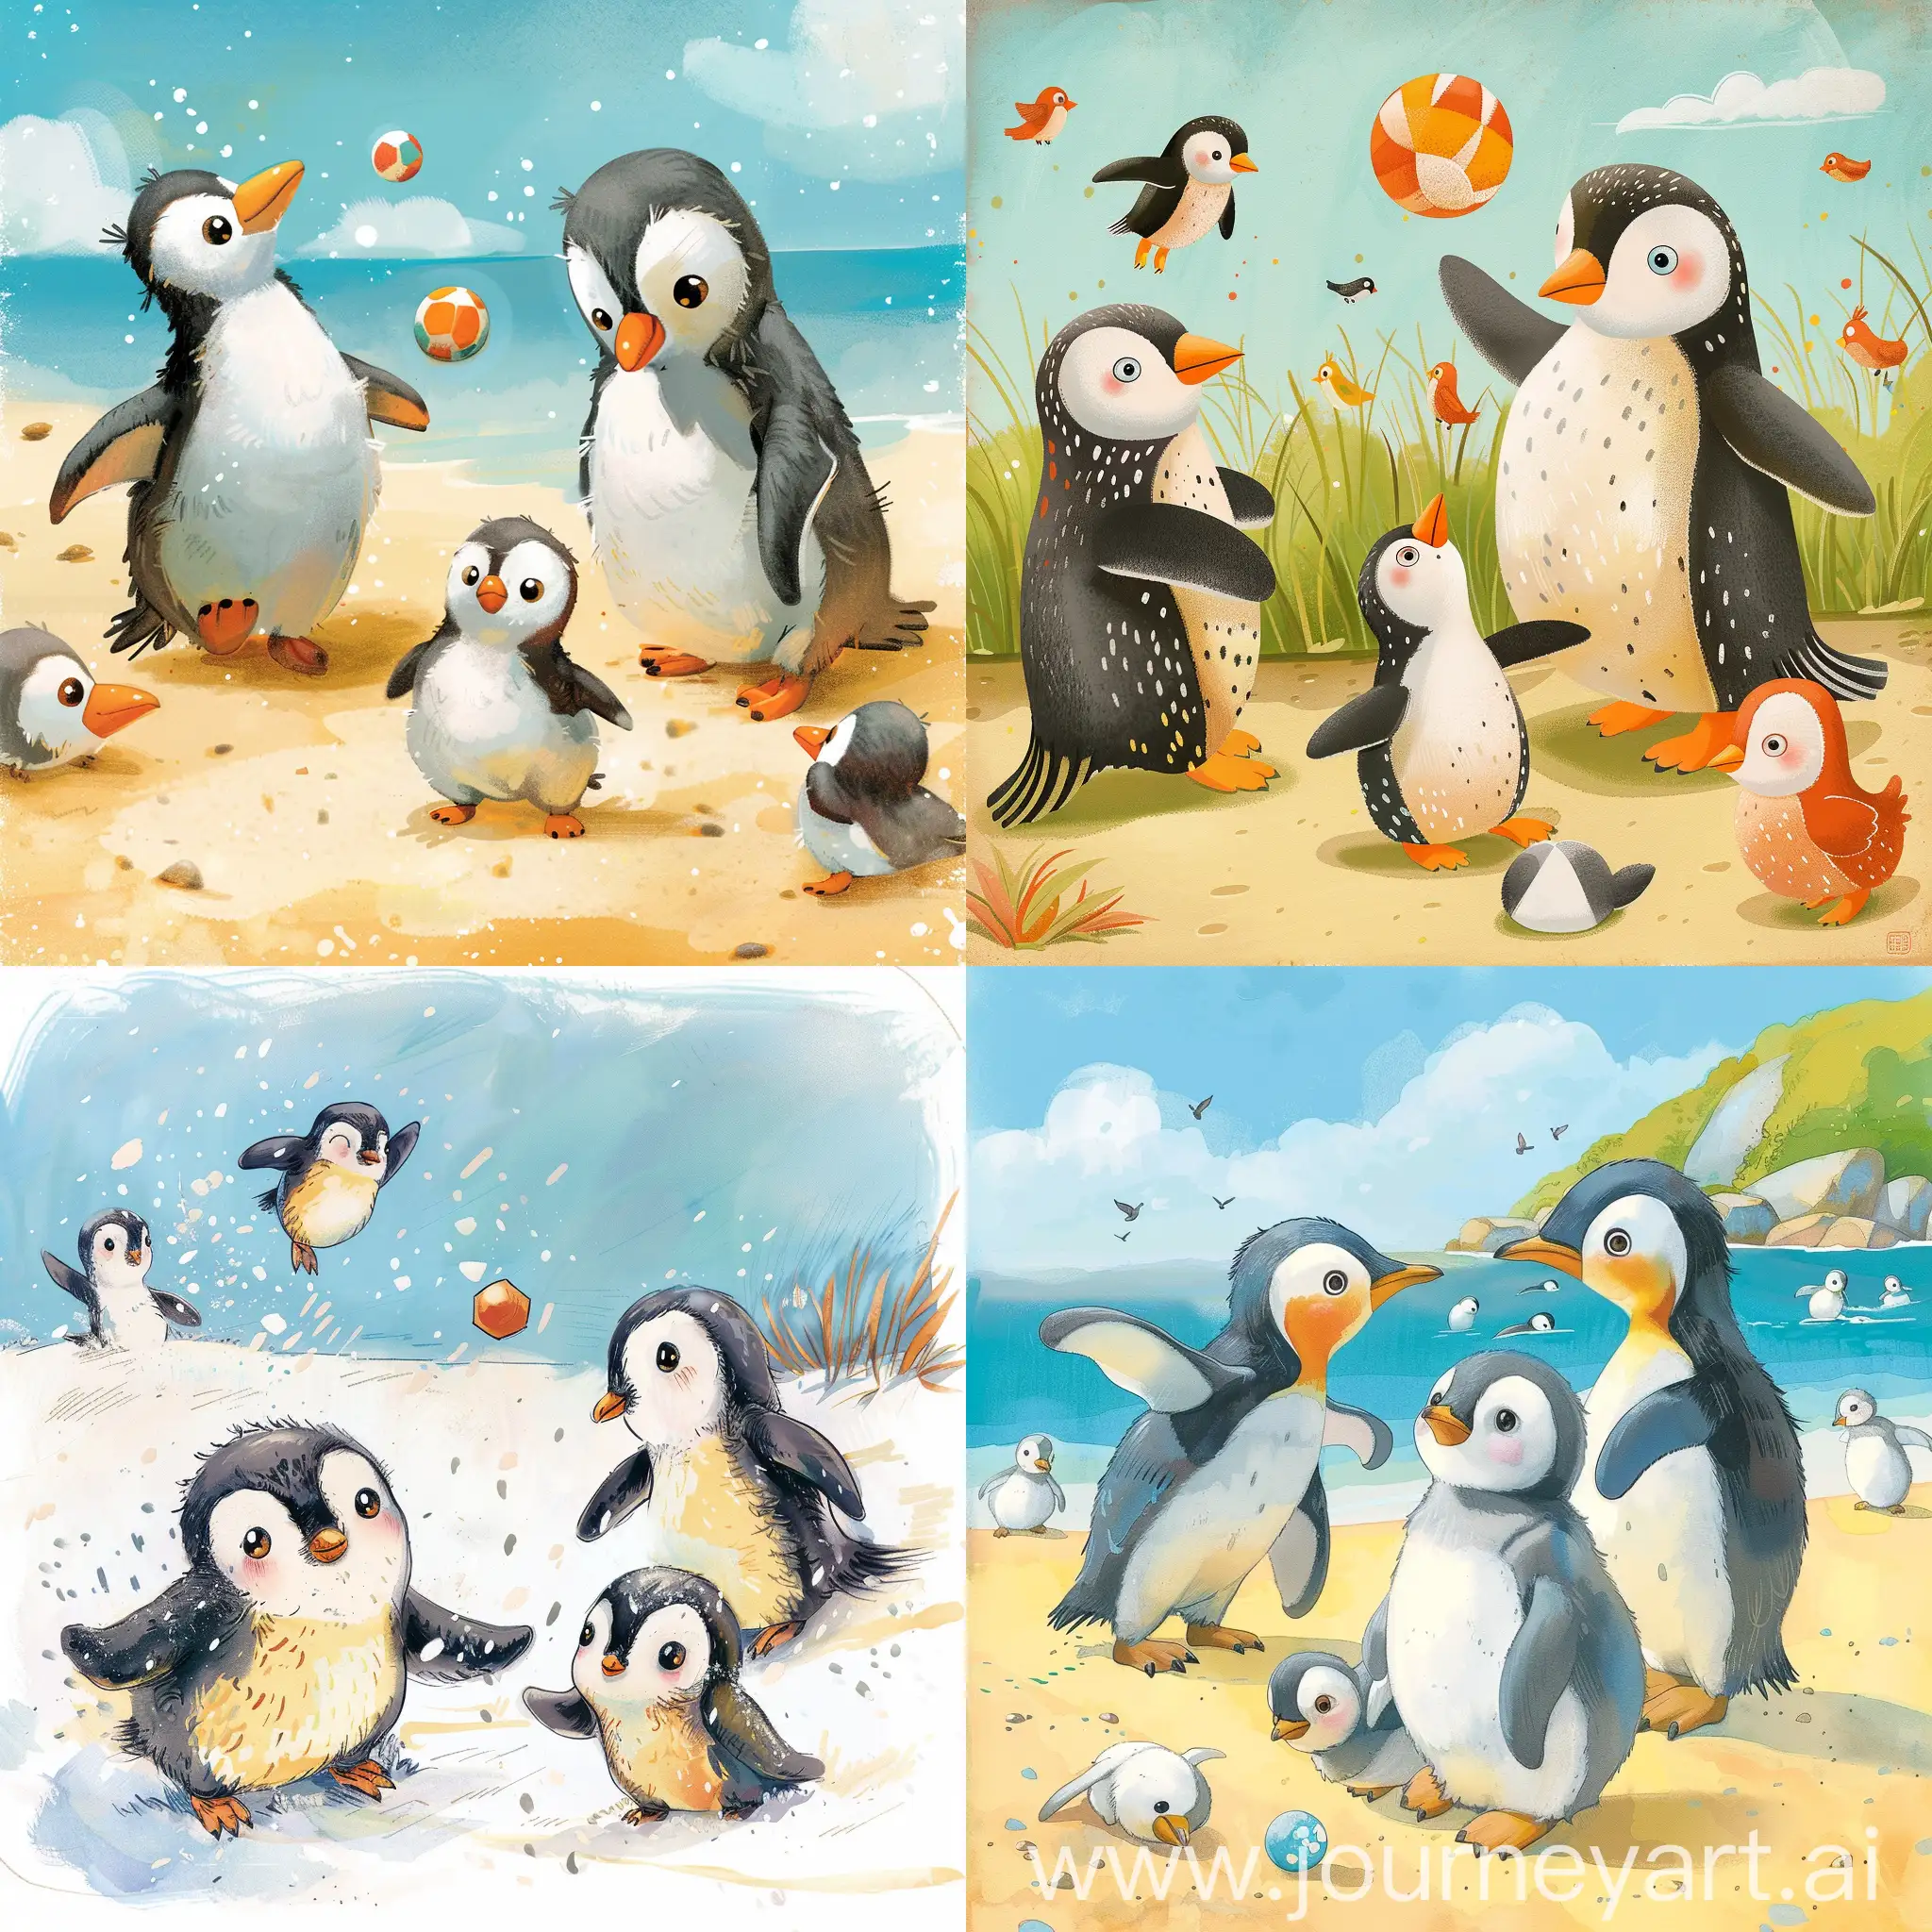 /imagine prompt Penguin plays with his parents and wanders off to play ball with other penguin chicks. Storybook illustration 